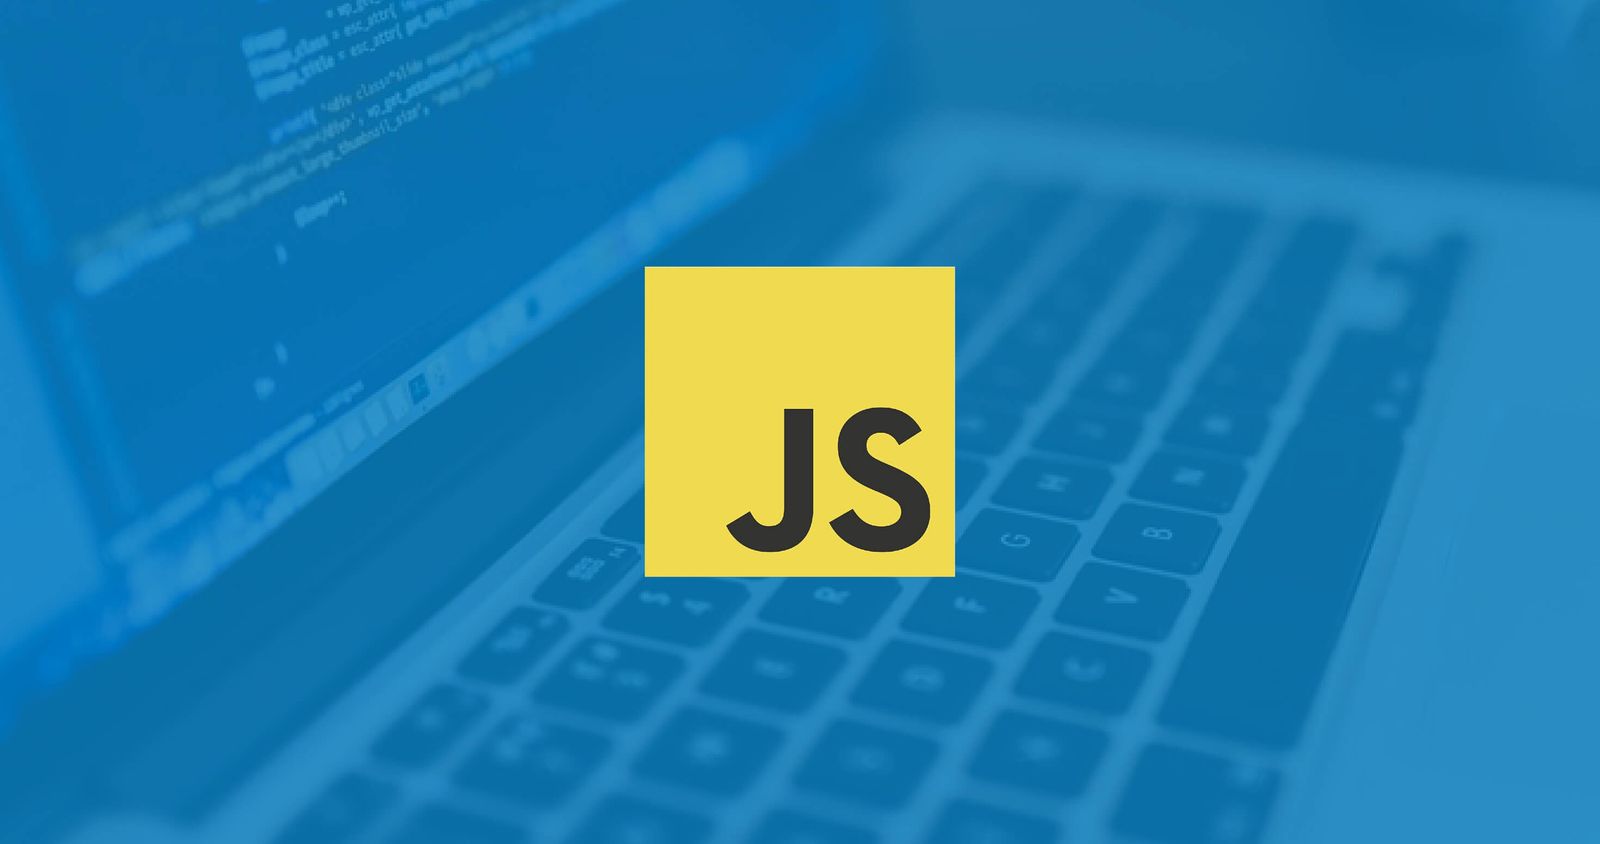 Refactoring that are relevant for cleaning up JavaScript conditionals